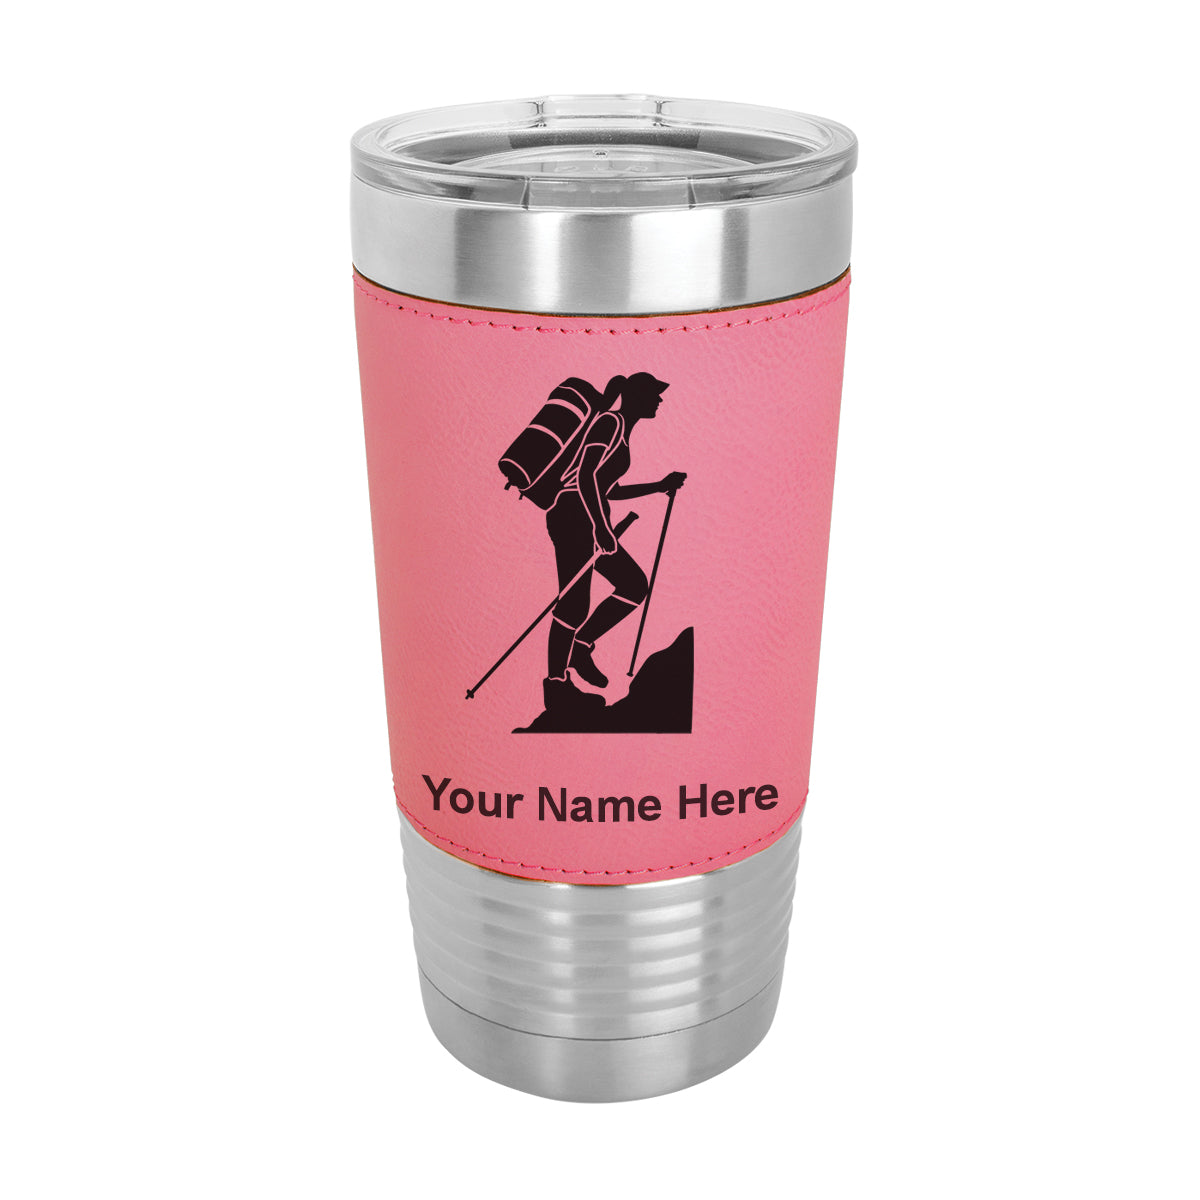 20oz Faux Leather Tumbler Mug, Hiker Woman, Personalized Engraving Included - LaserGram Custom Engraved Gifts